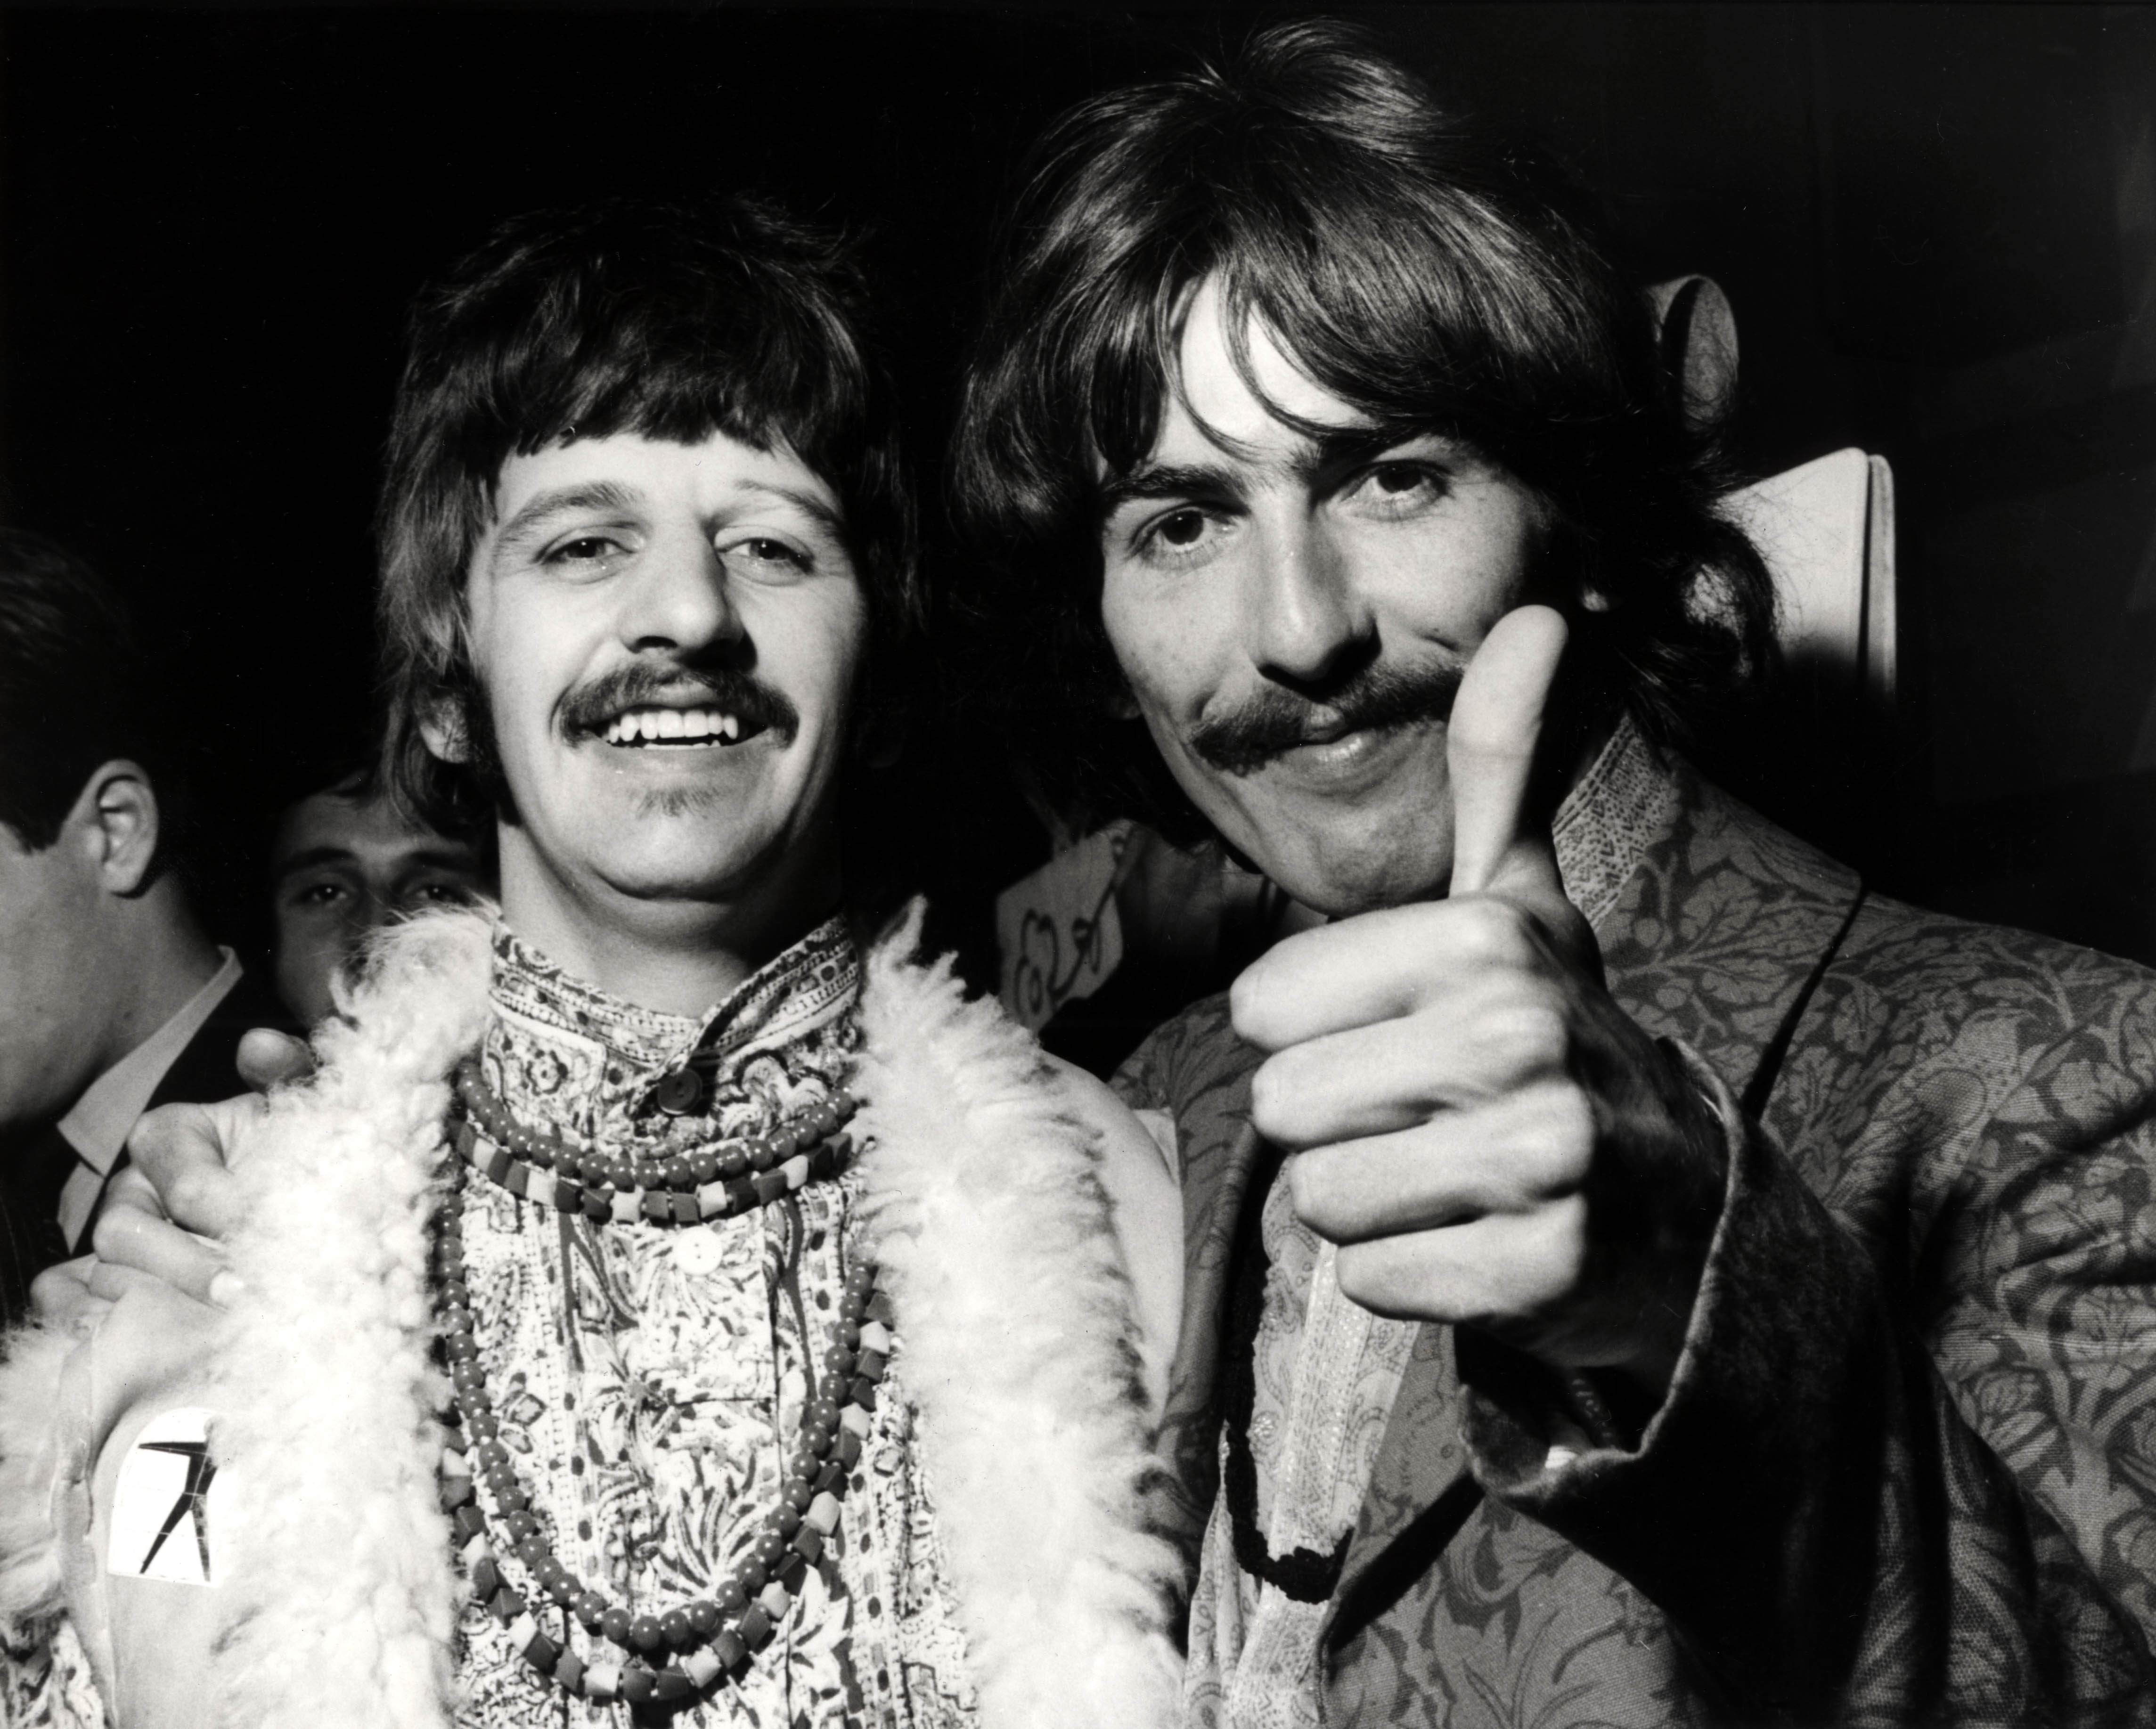 The Beatles' Ringo Starr standing next to George Harrison while the latter gives a thumbs up